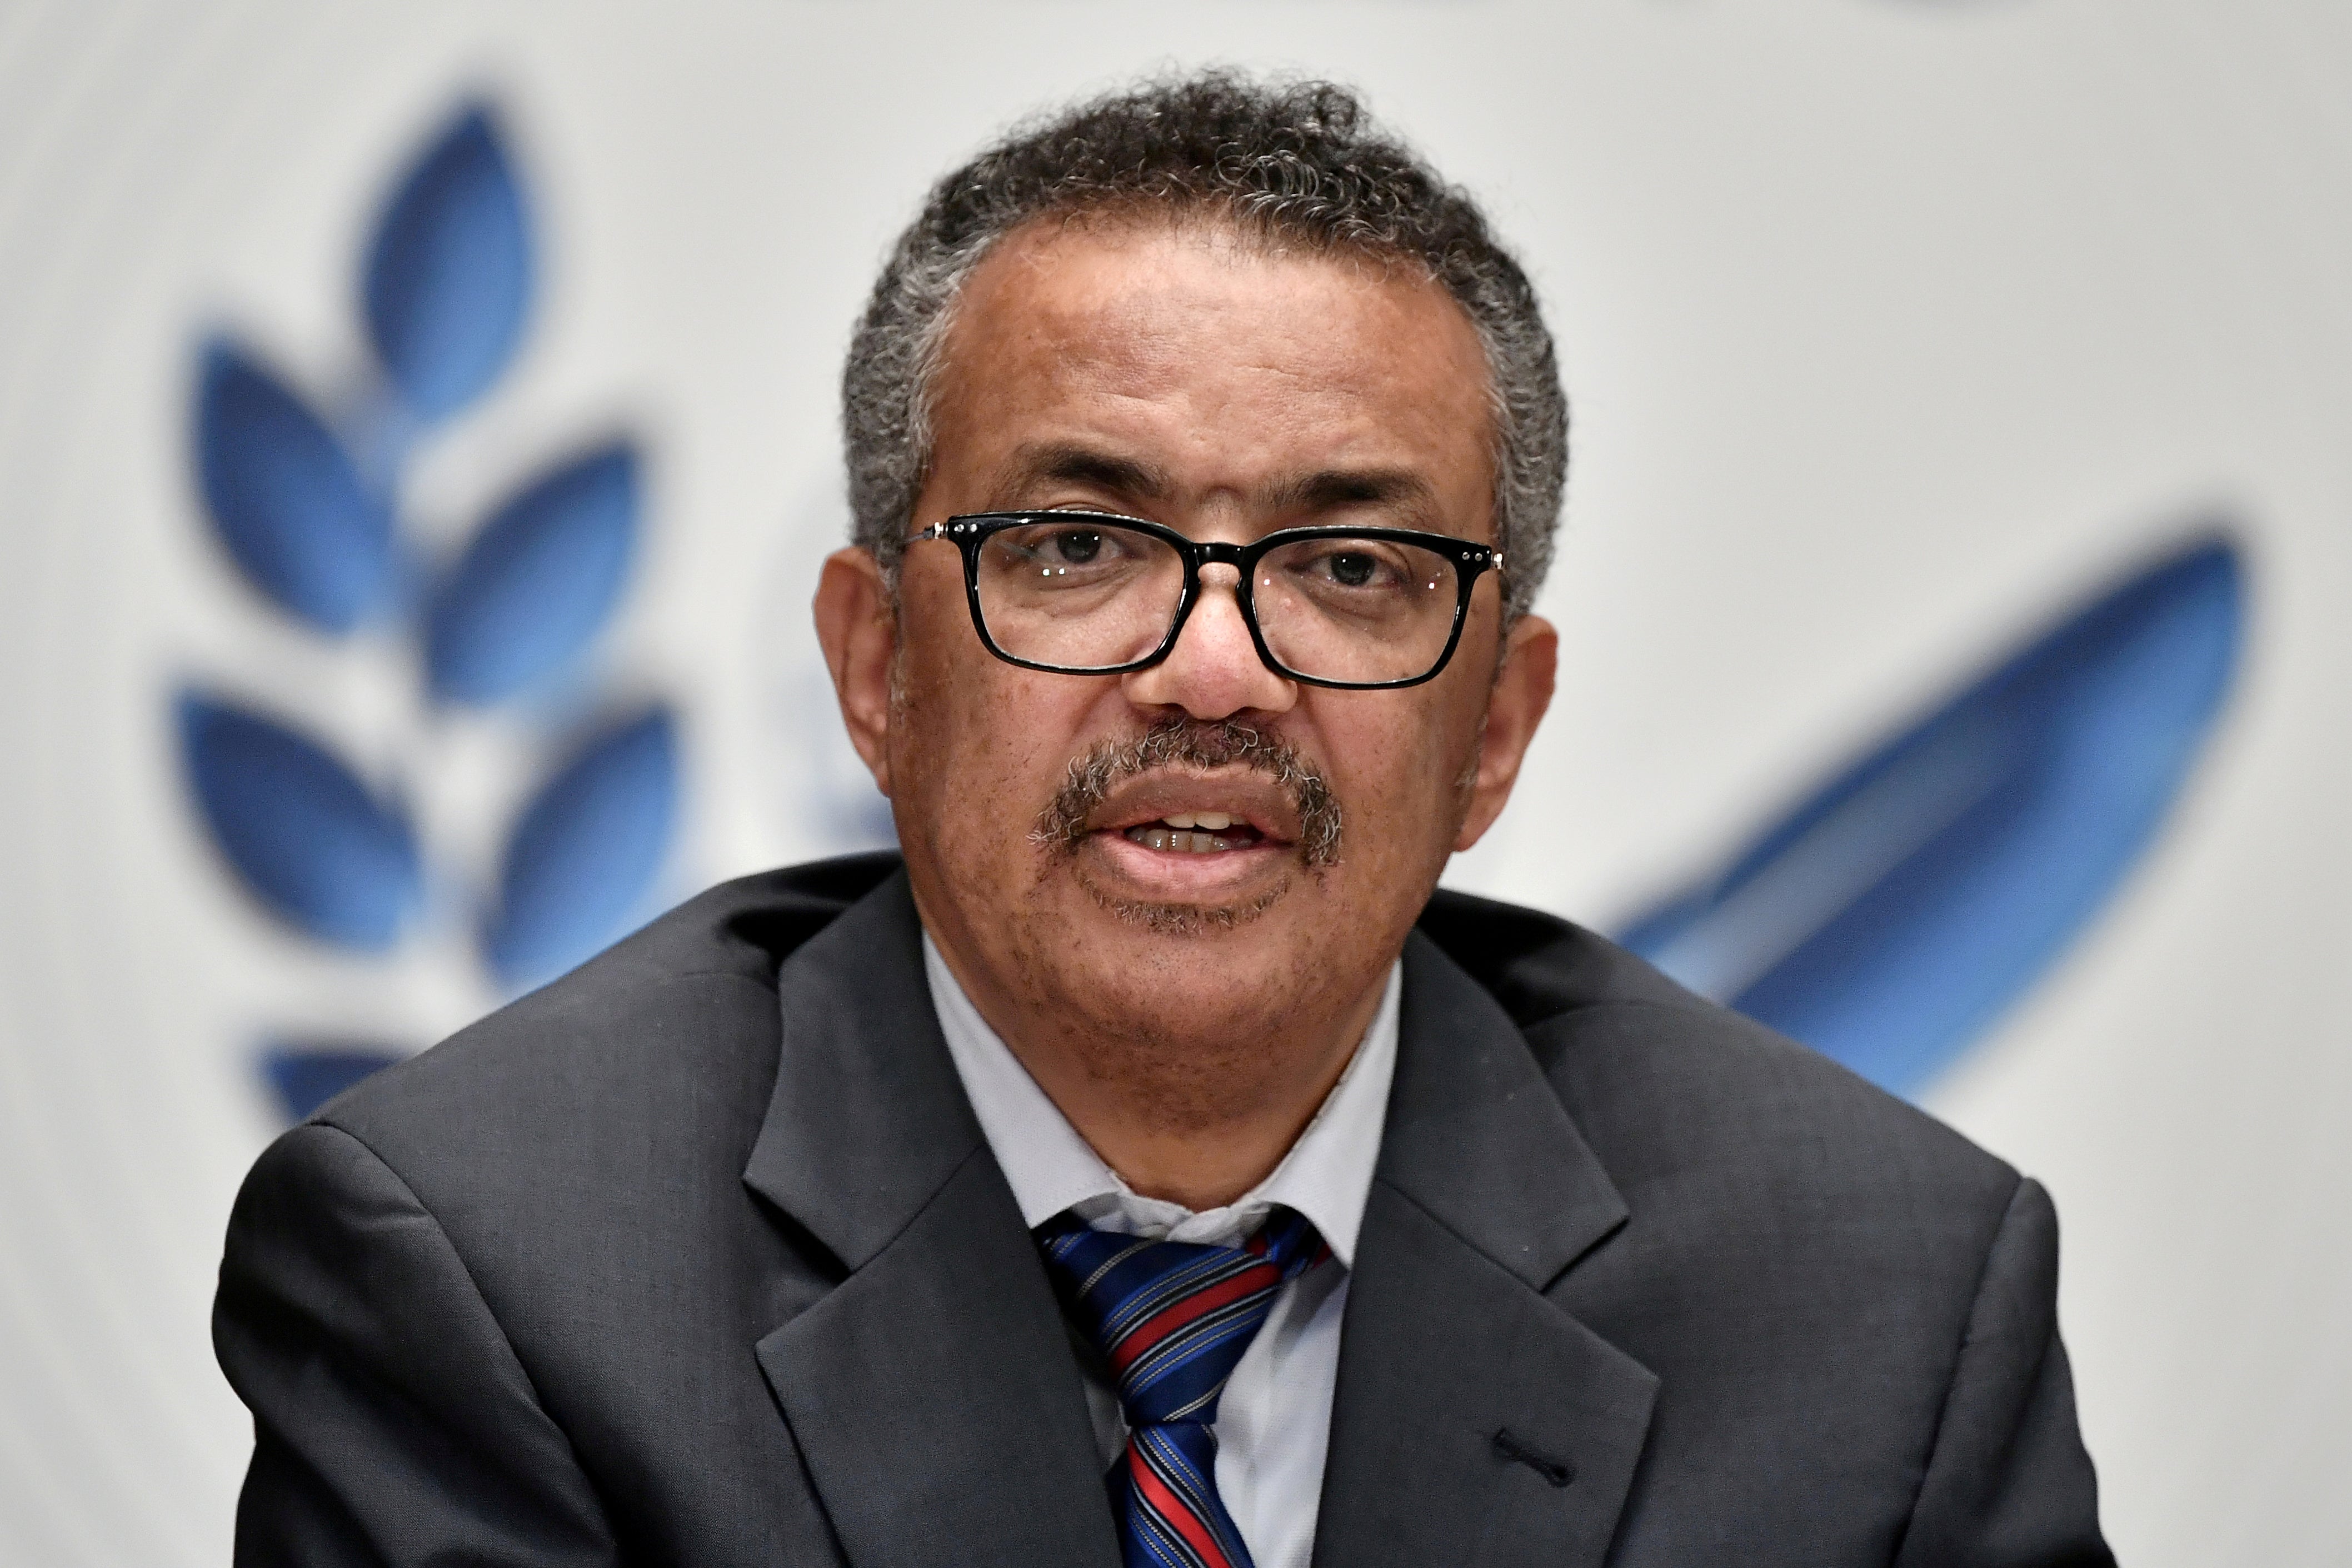 Dr Tedros Adhanom Ghebreyesus warned that it was vital all countries recieved the Covid-19 vaccine as quickly as possible